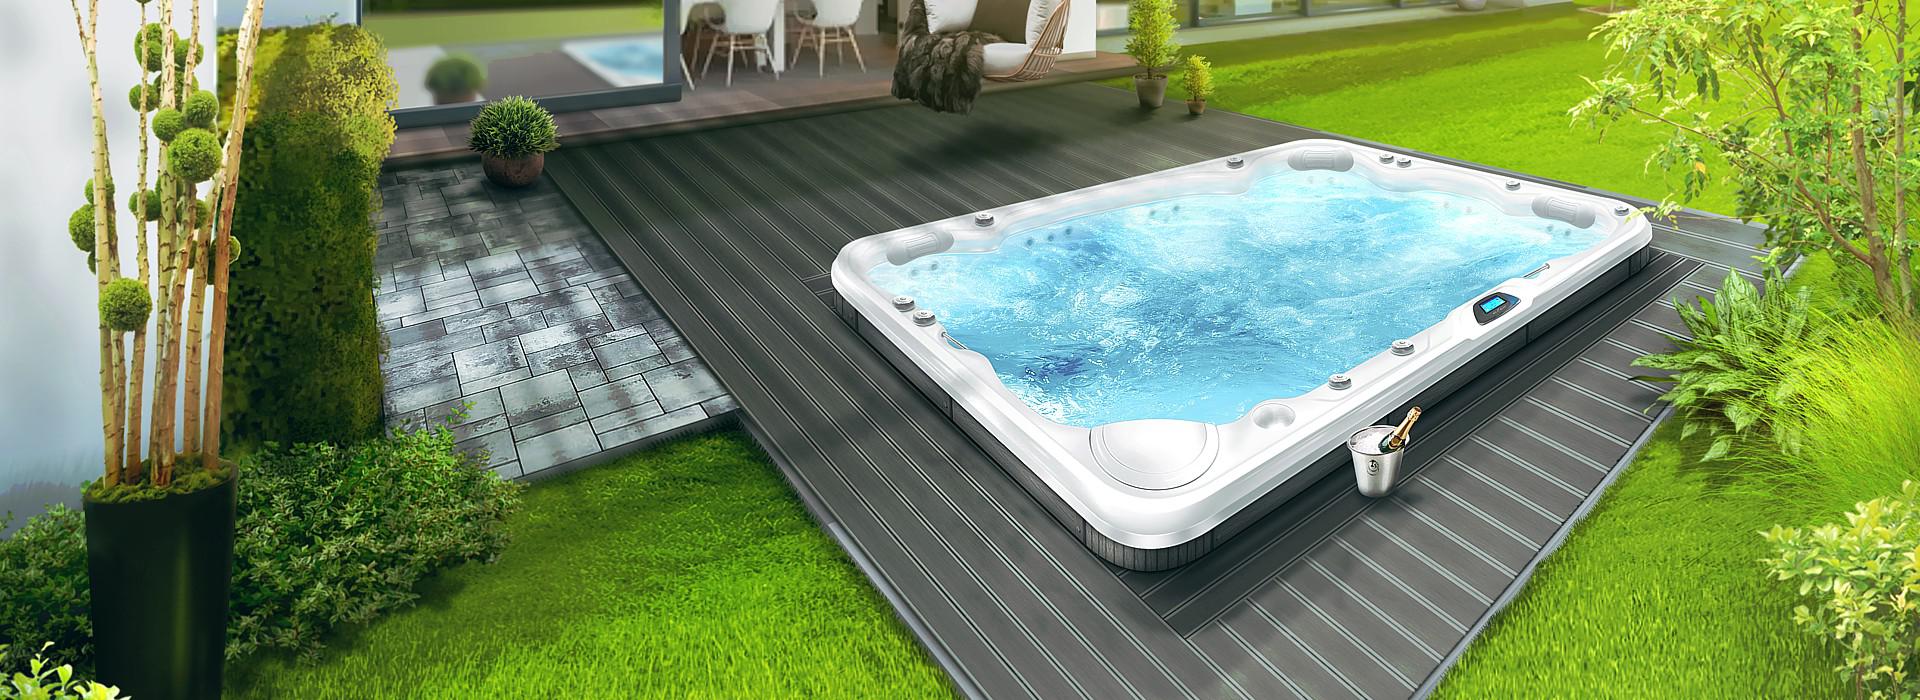 Giant hot tub for whole family by Canadian Spa International®